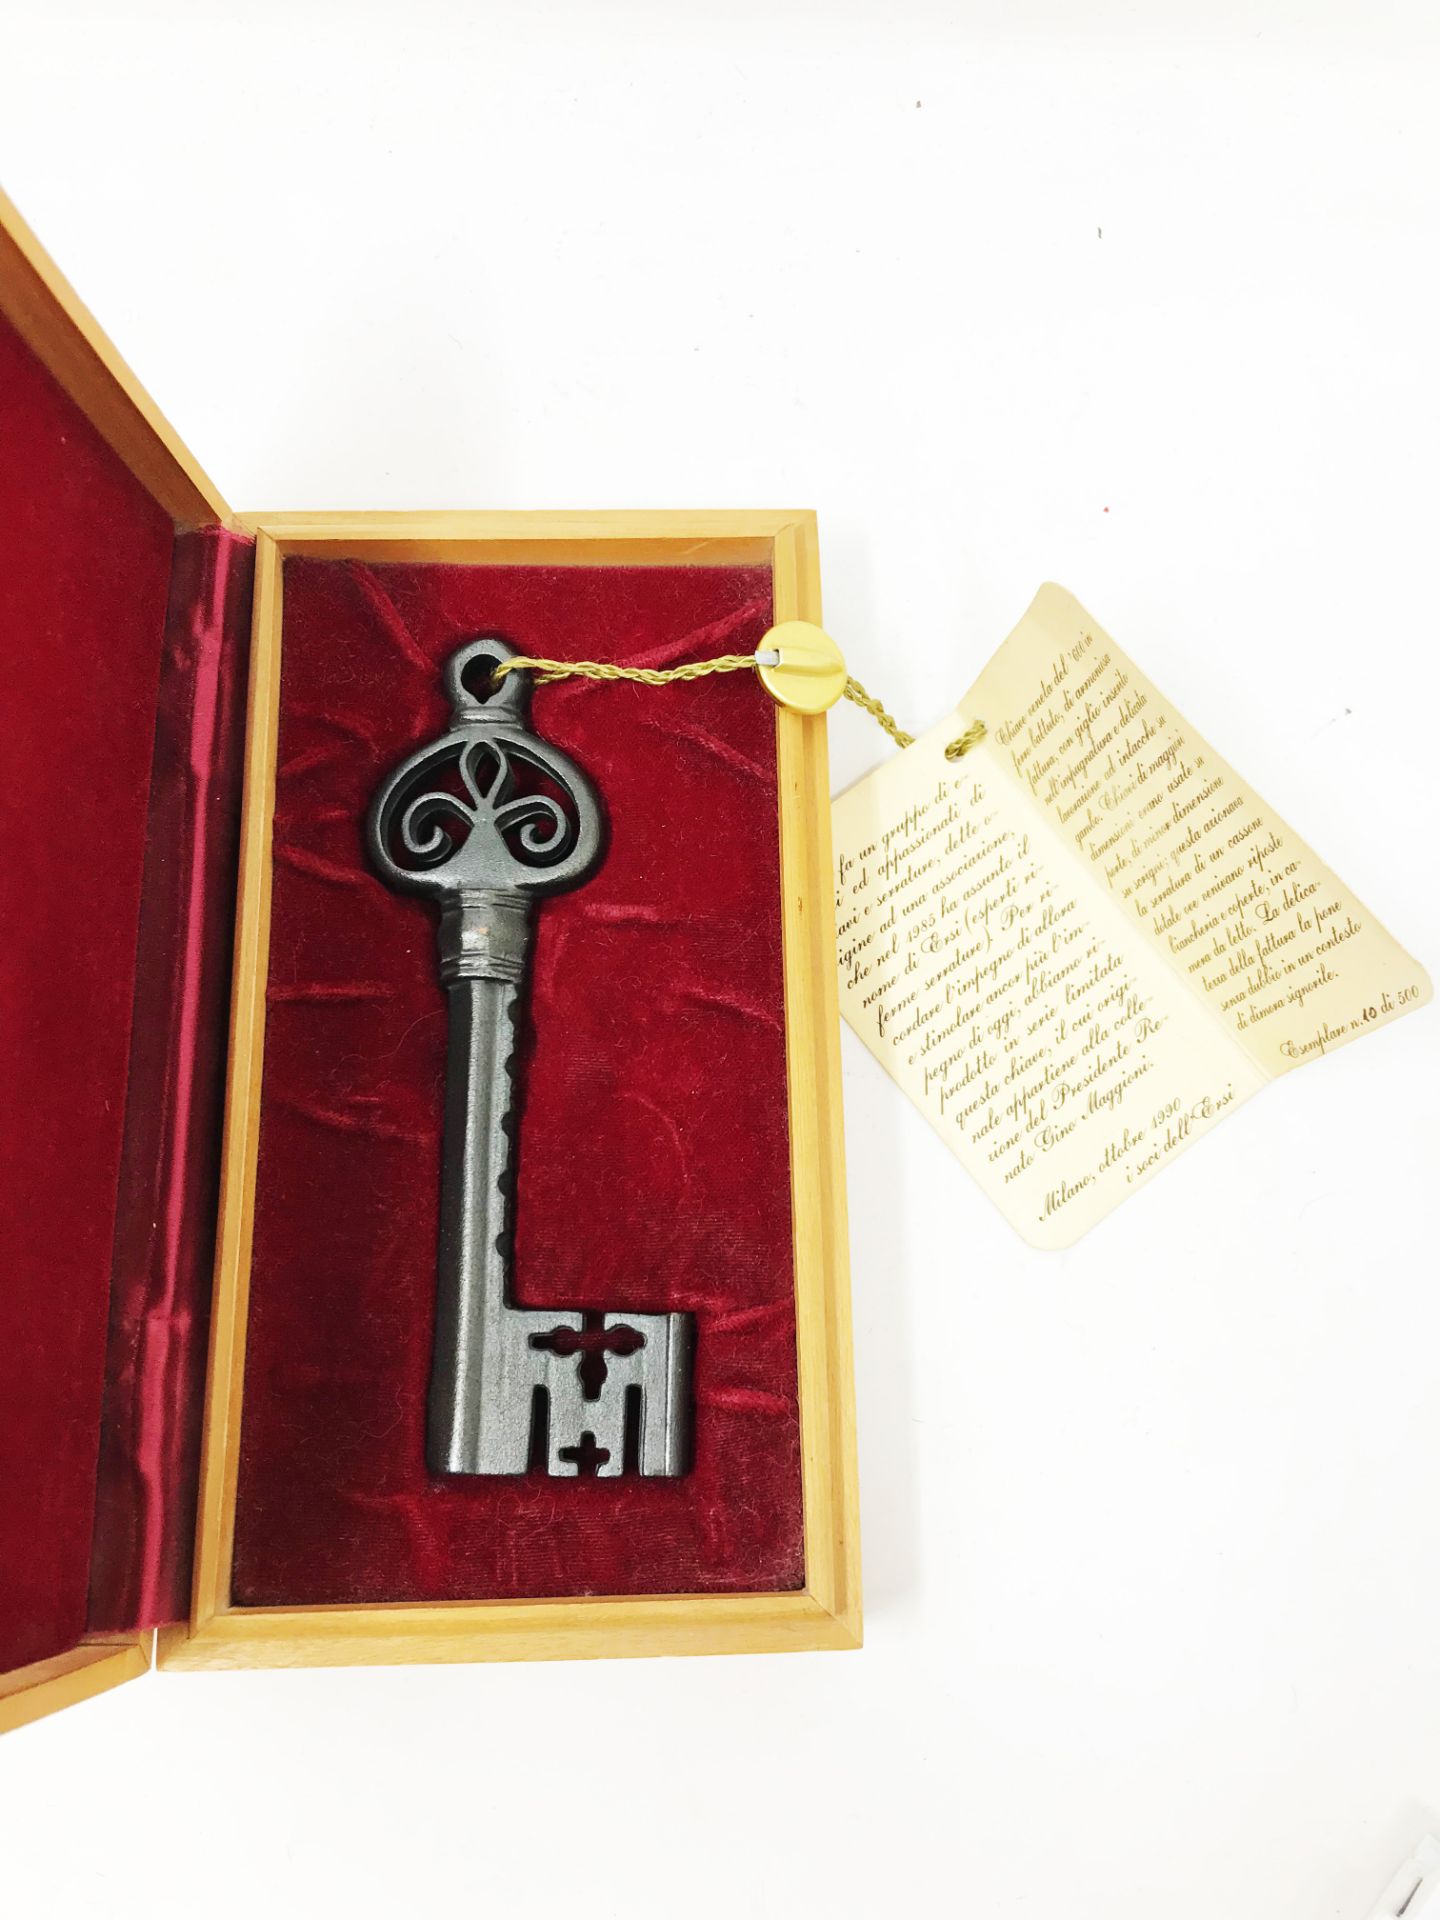 Reproduction of a Venetian key commemorating the 15th anniversary of the foundation of Ersi -